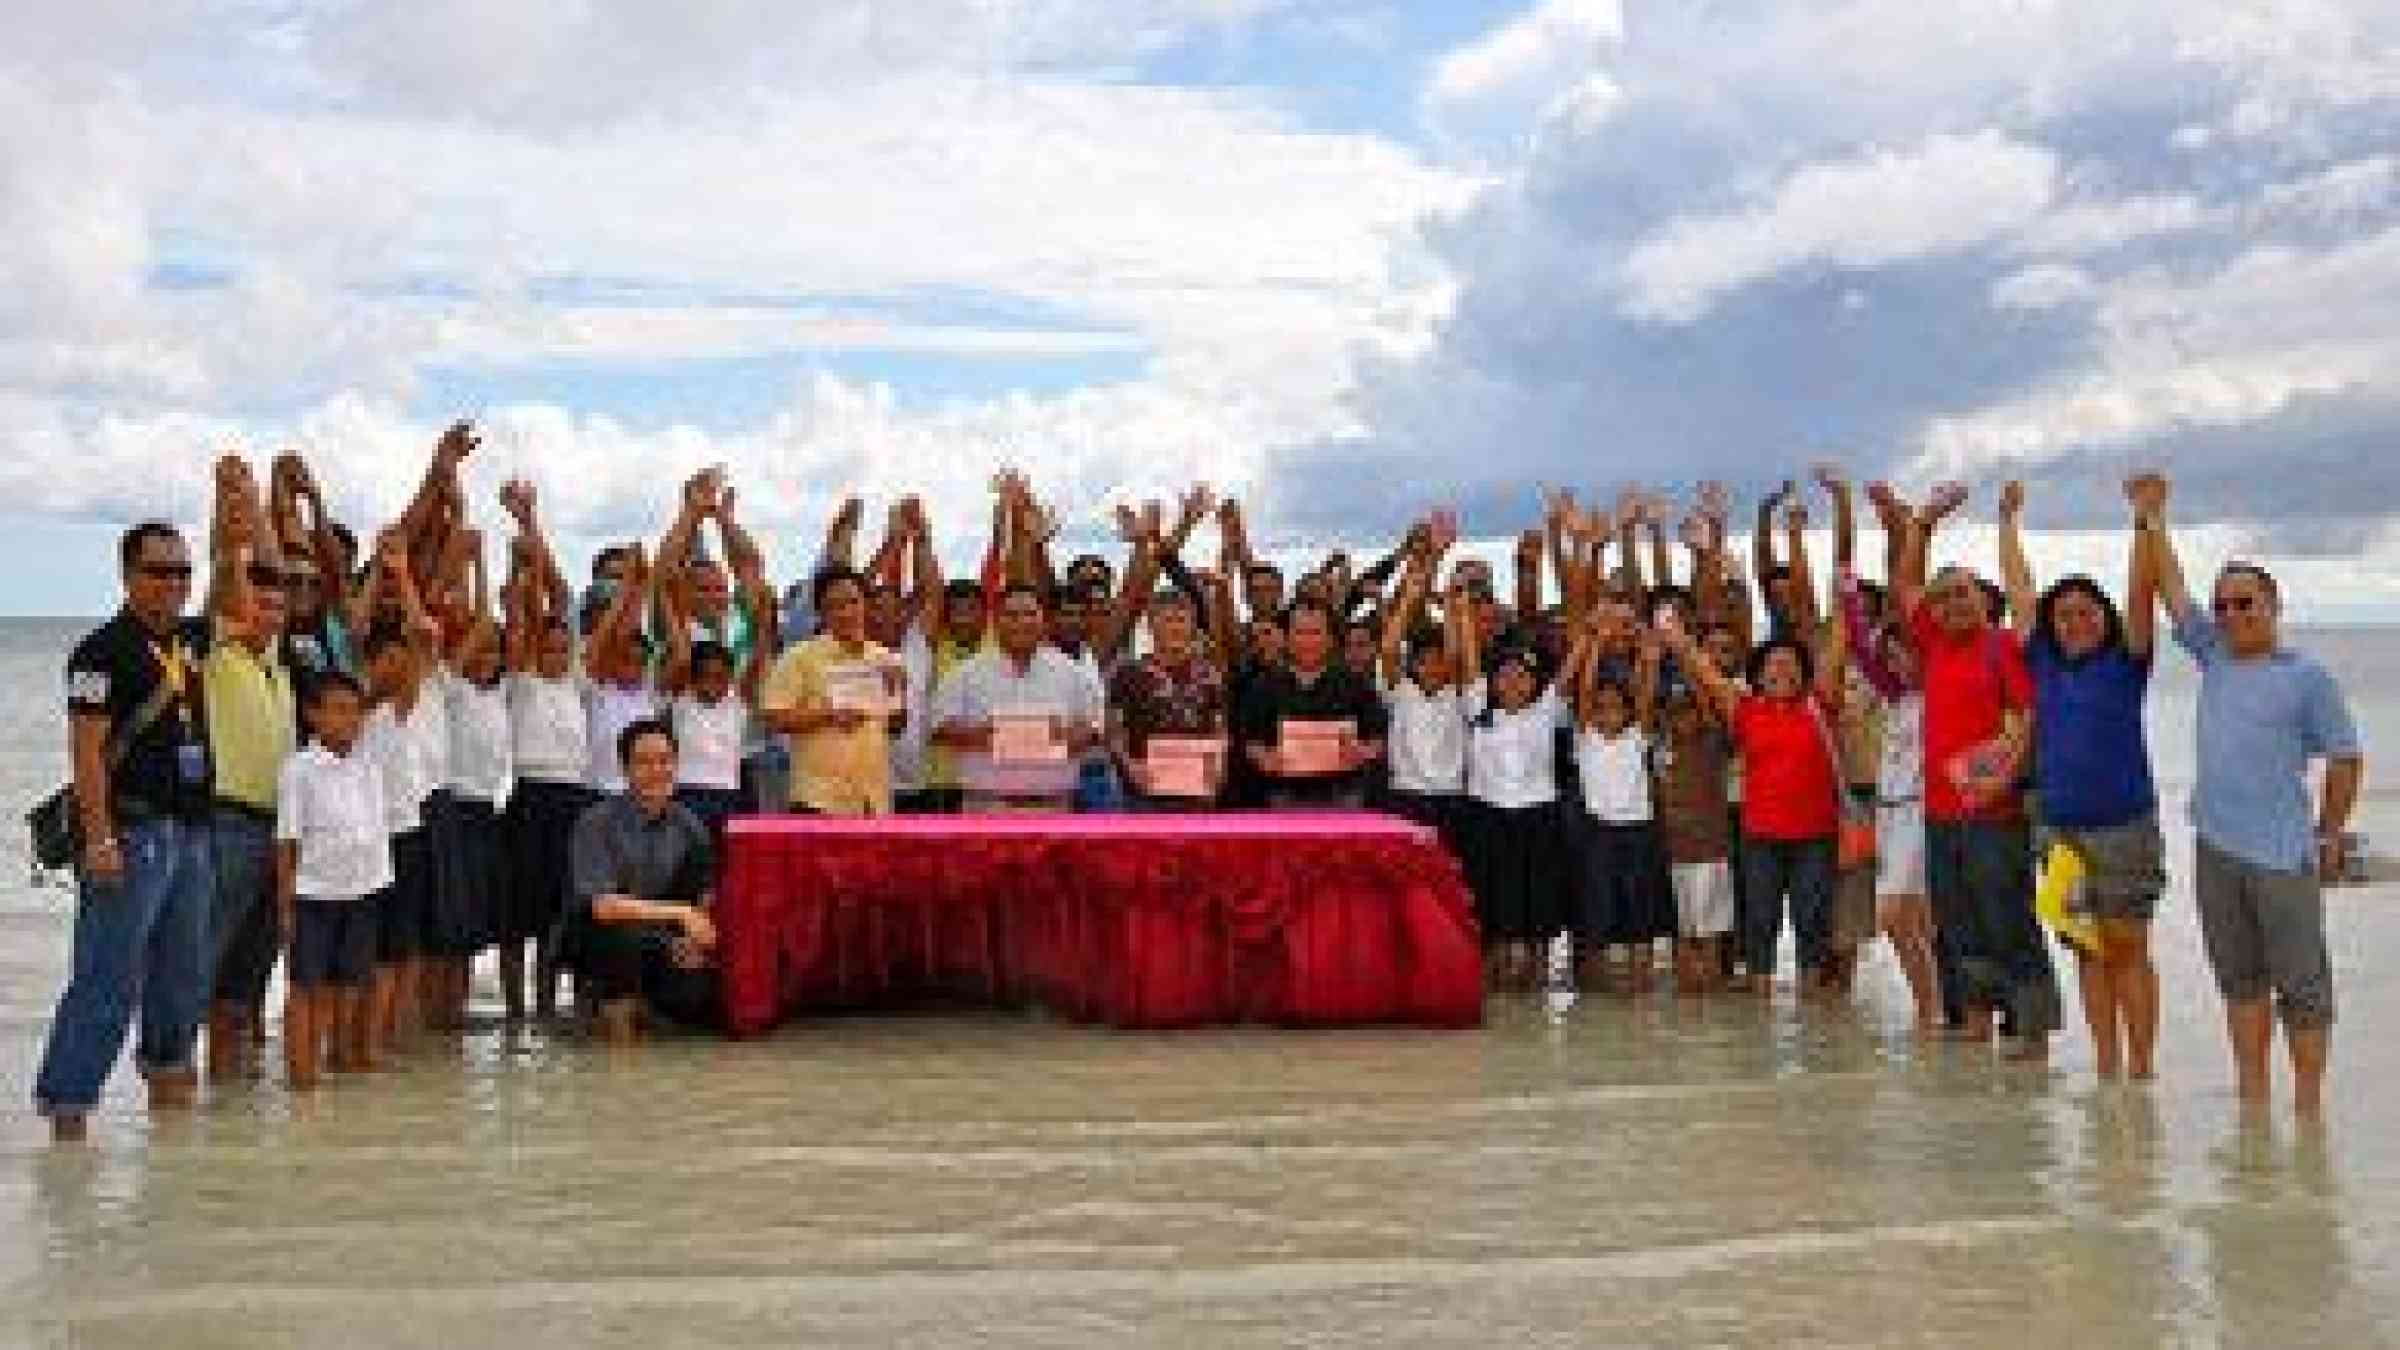 Photo by UNISDR. Mayors and children lead fight against climate change in the Philippines. https://www.flickr.com/photos/isdr/5257933430 CC BY-NC-ND 2.0